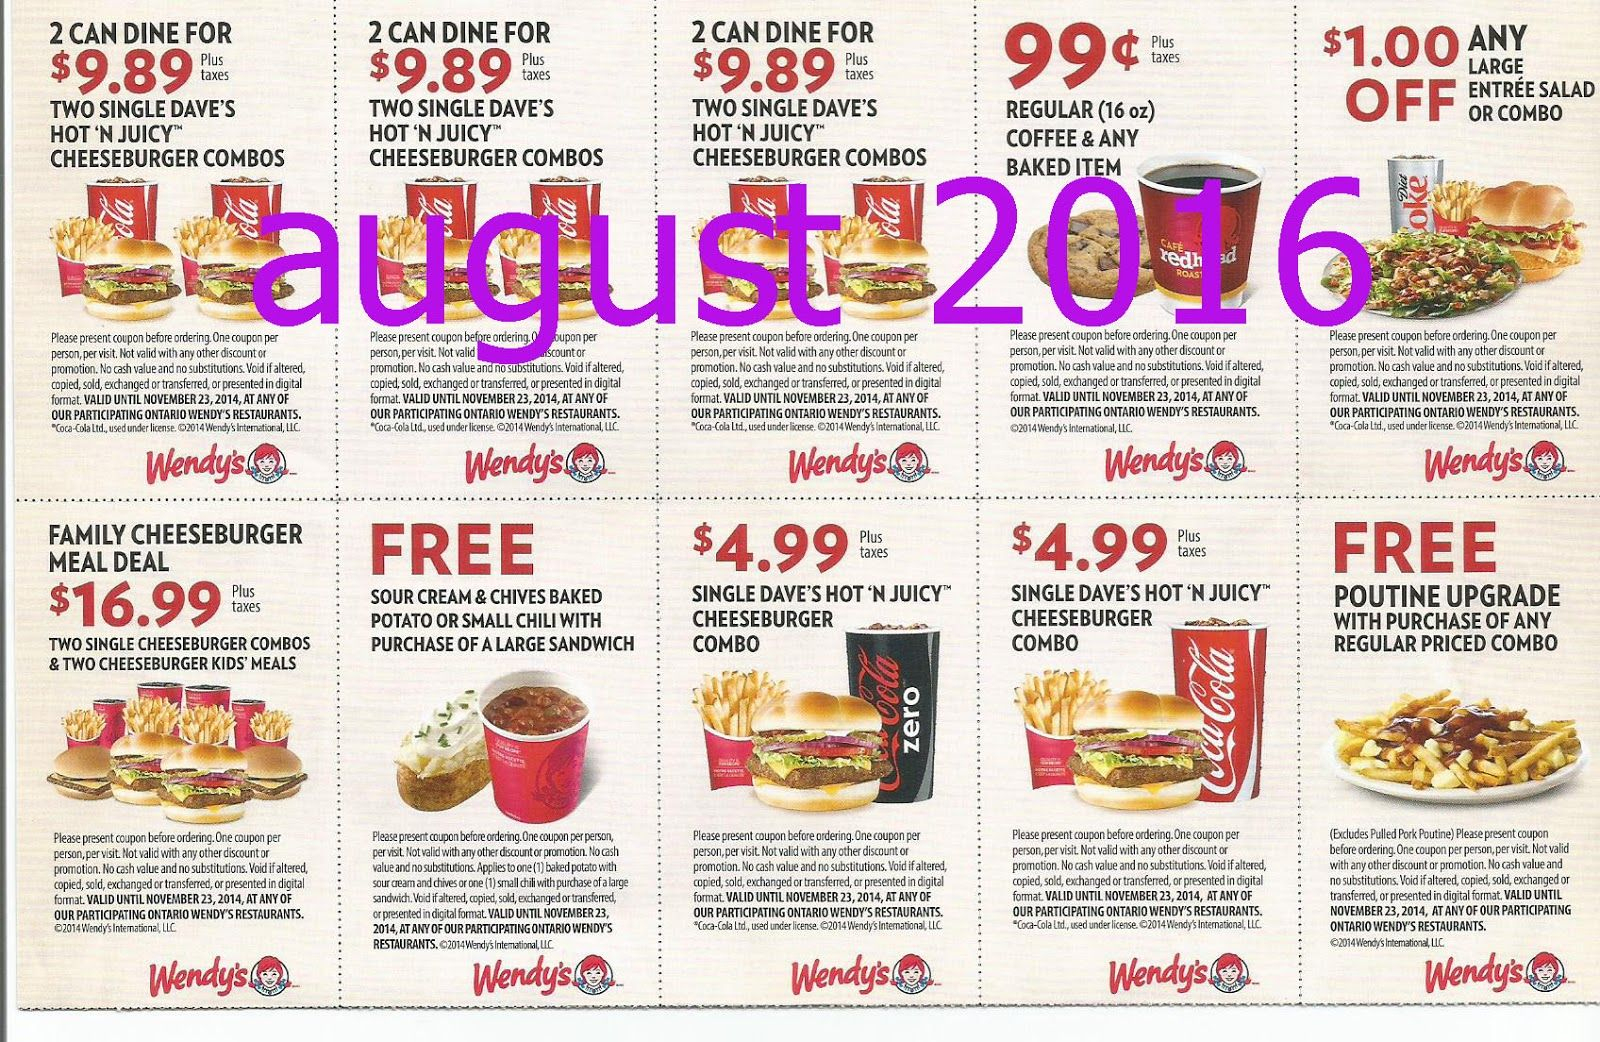 Free Printable Coupons: Wendys Coupons | Fast Food Coupons - Free Printable Coupons For Food